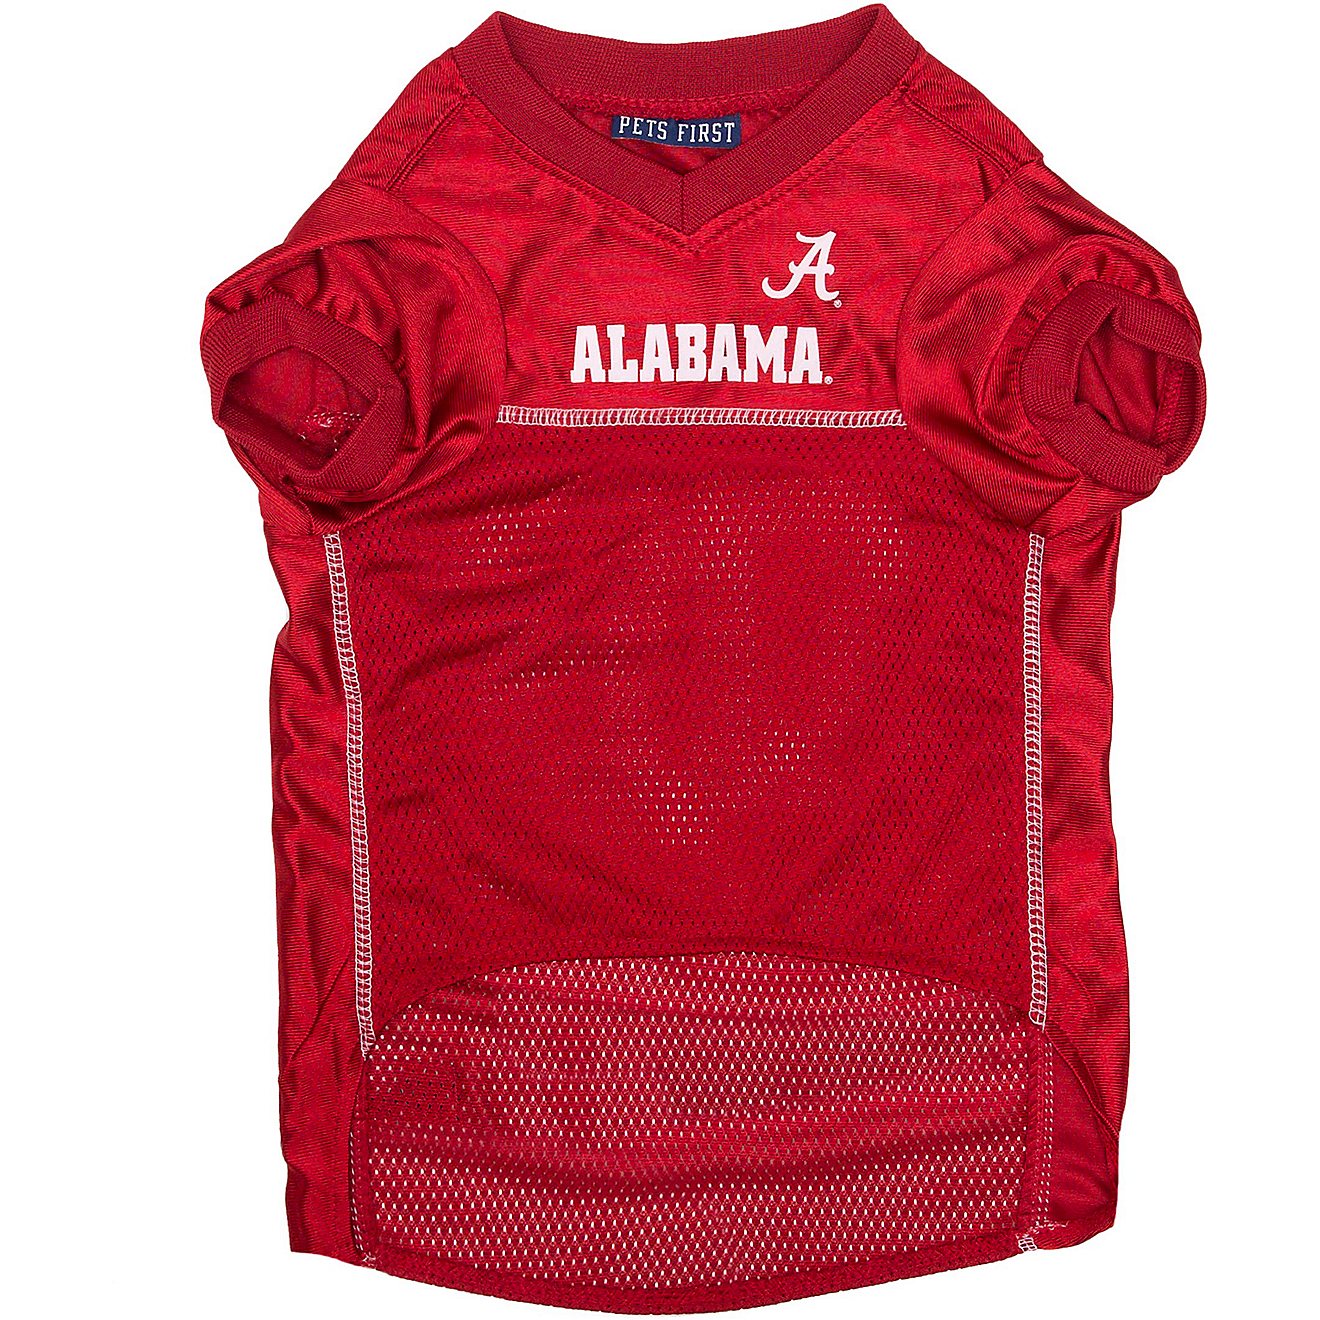 Pets First University of Alabama Mesh Dog Jersey                                                                                 - view number 1